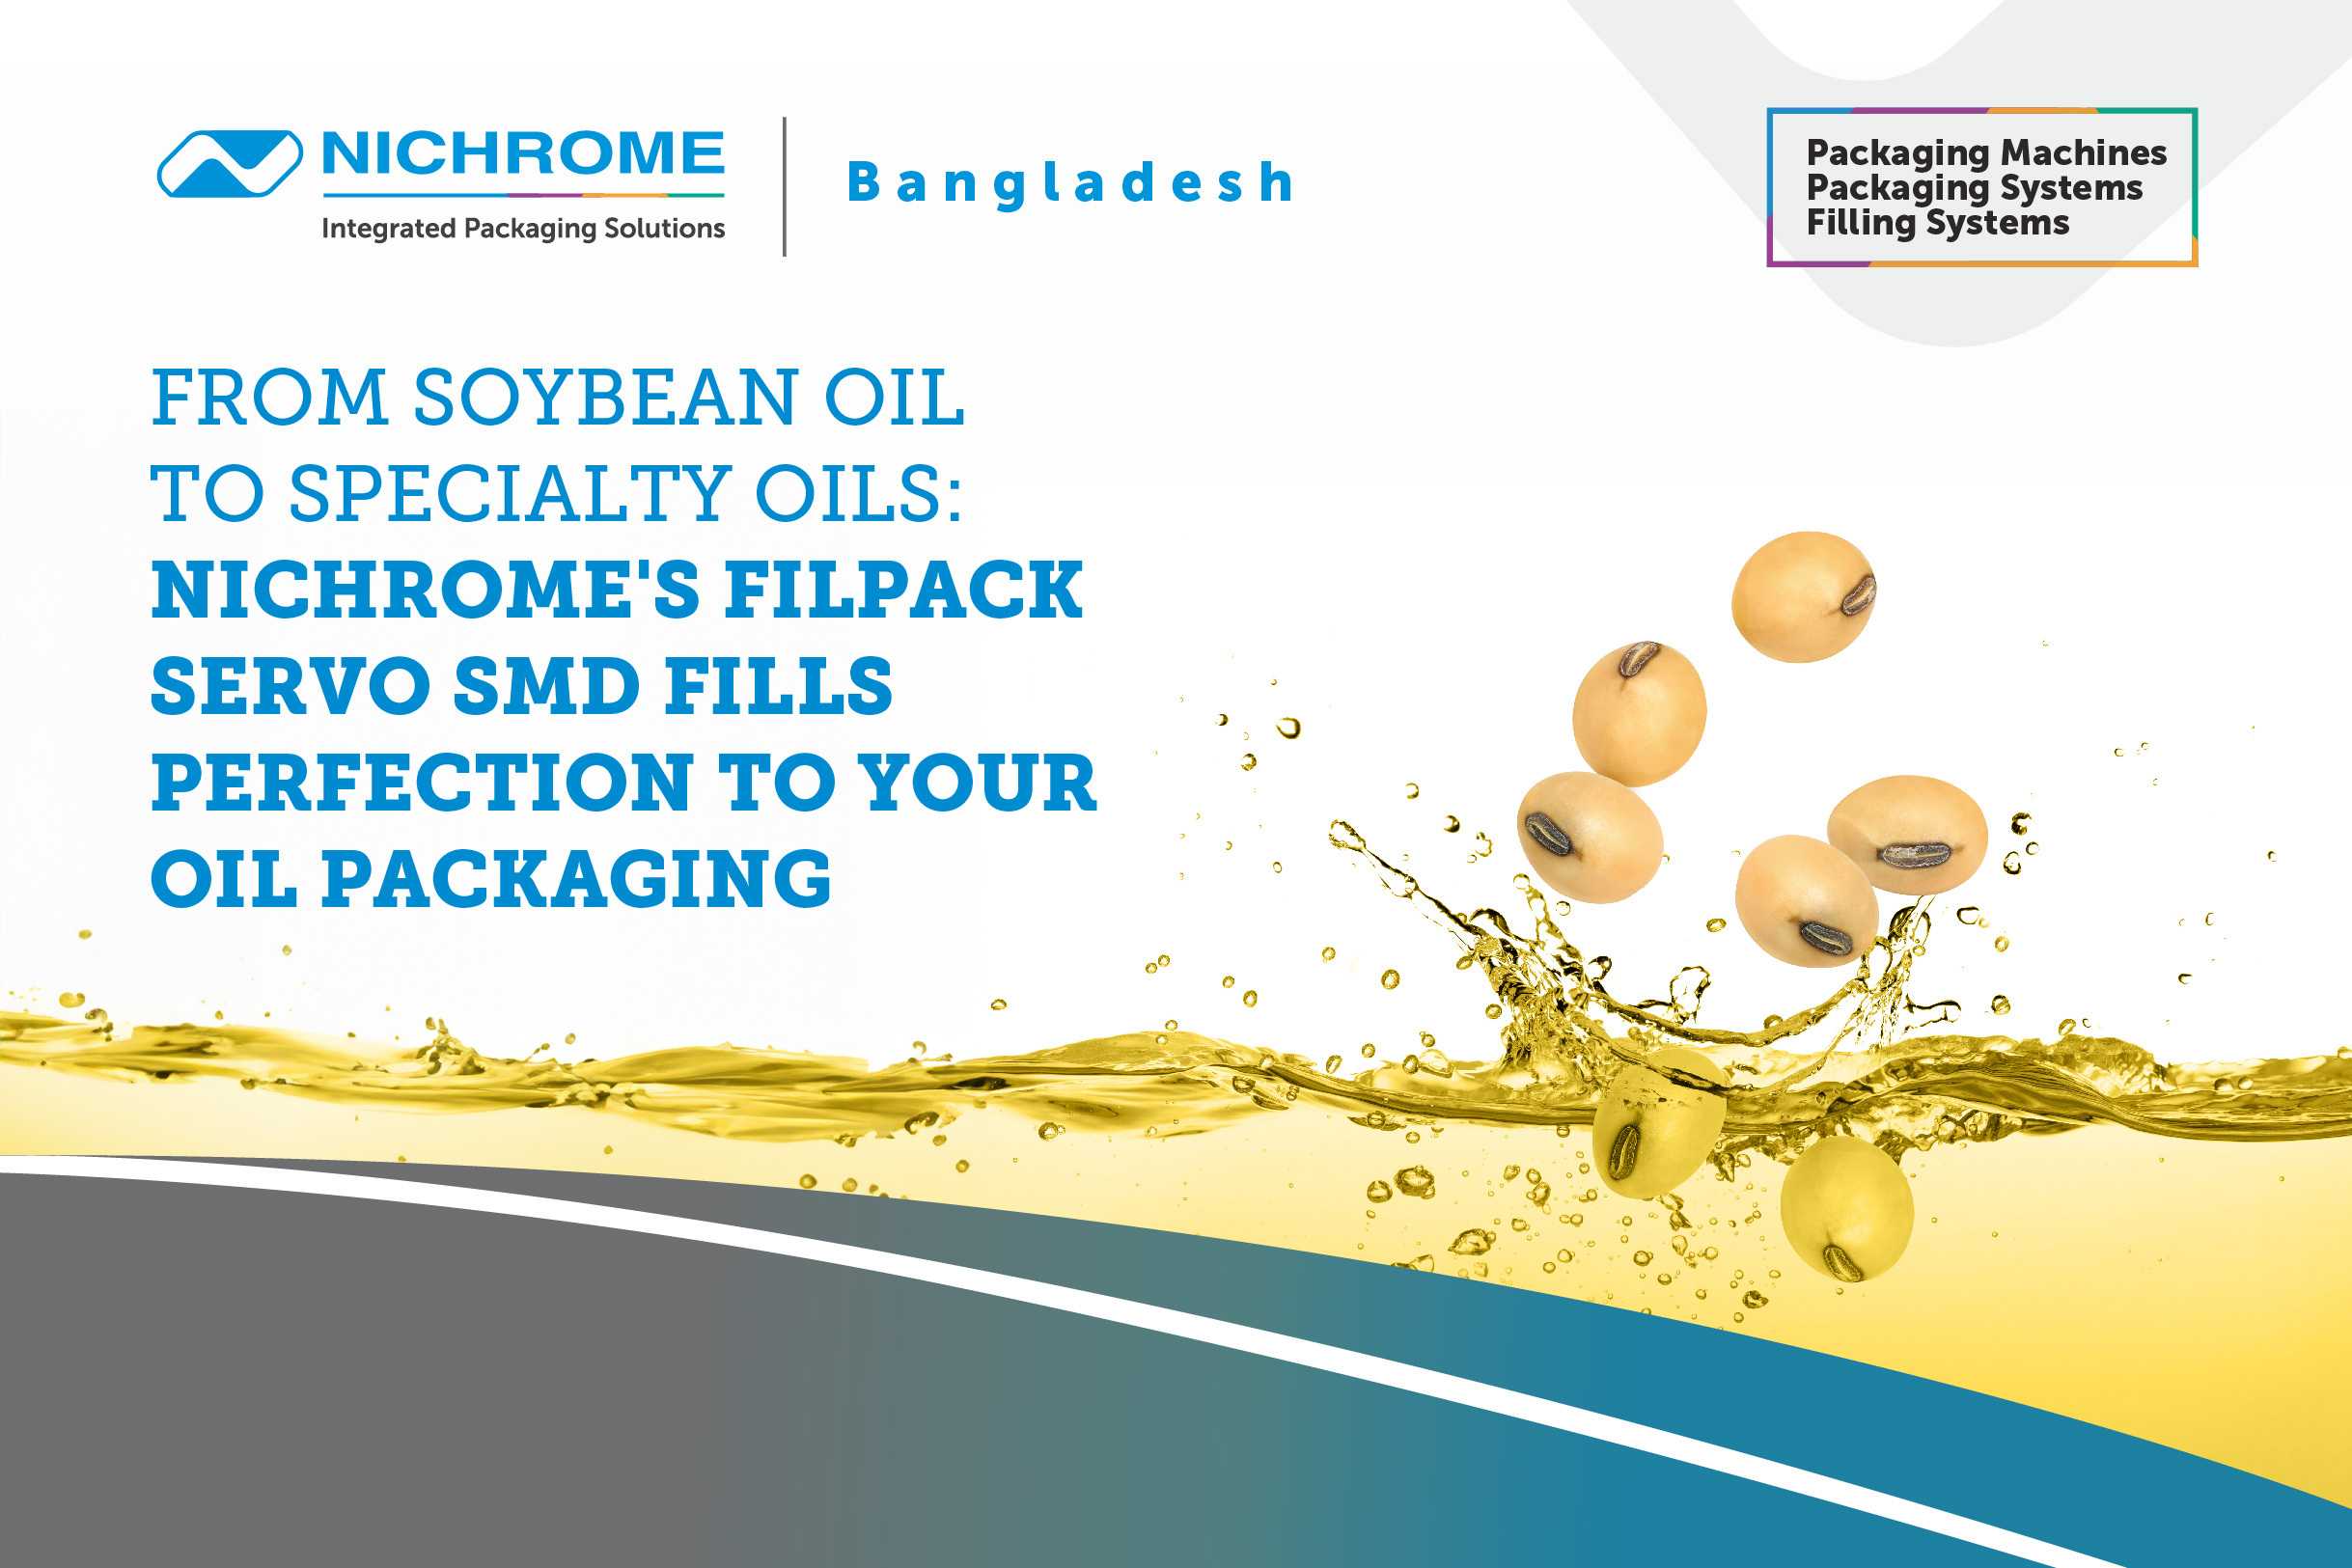 From Soybean Oil To Specialty Oils: Nichrome's Filpack Servo SMD Fills Perfection To Your Oil Packaging